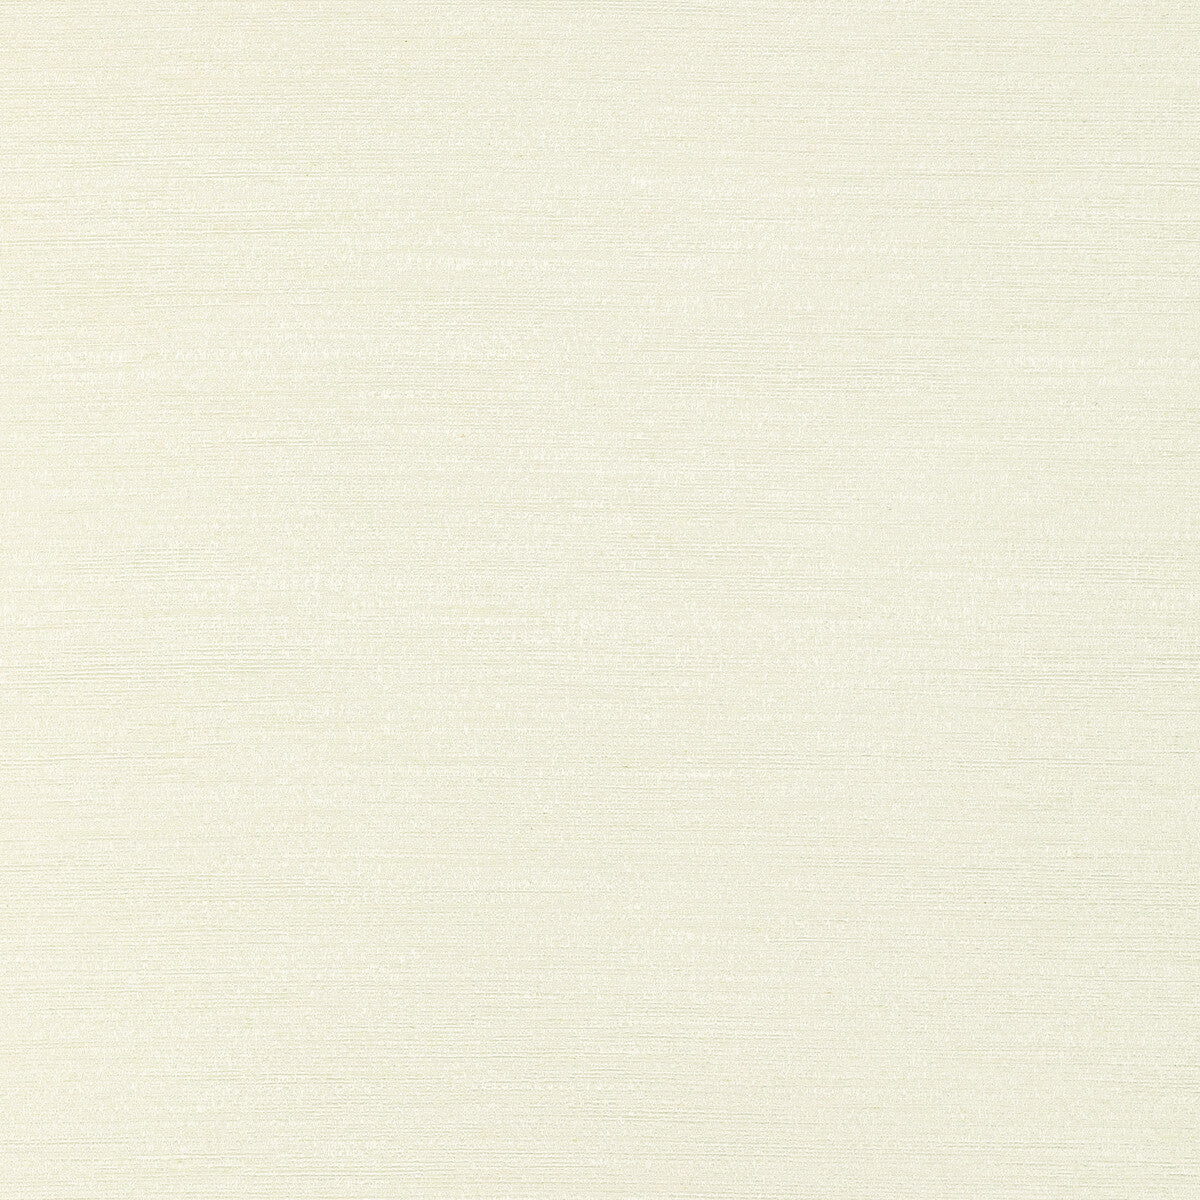 Cultivate fabric in cream color - pattern 4957.16.0 - by Kravet Couture in the Modern Luxe Silk Luster collection